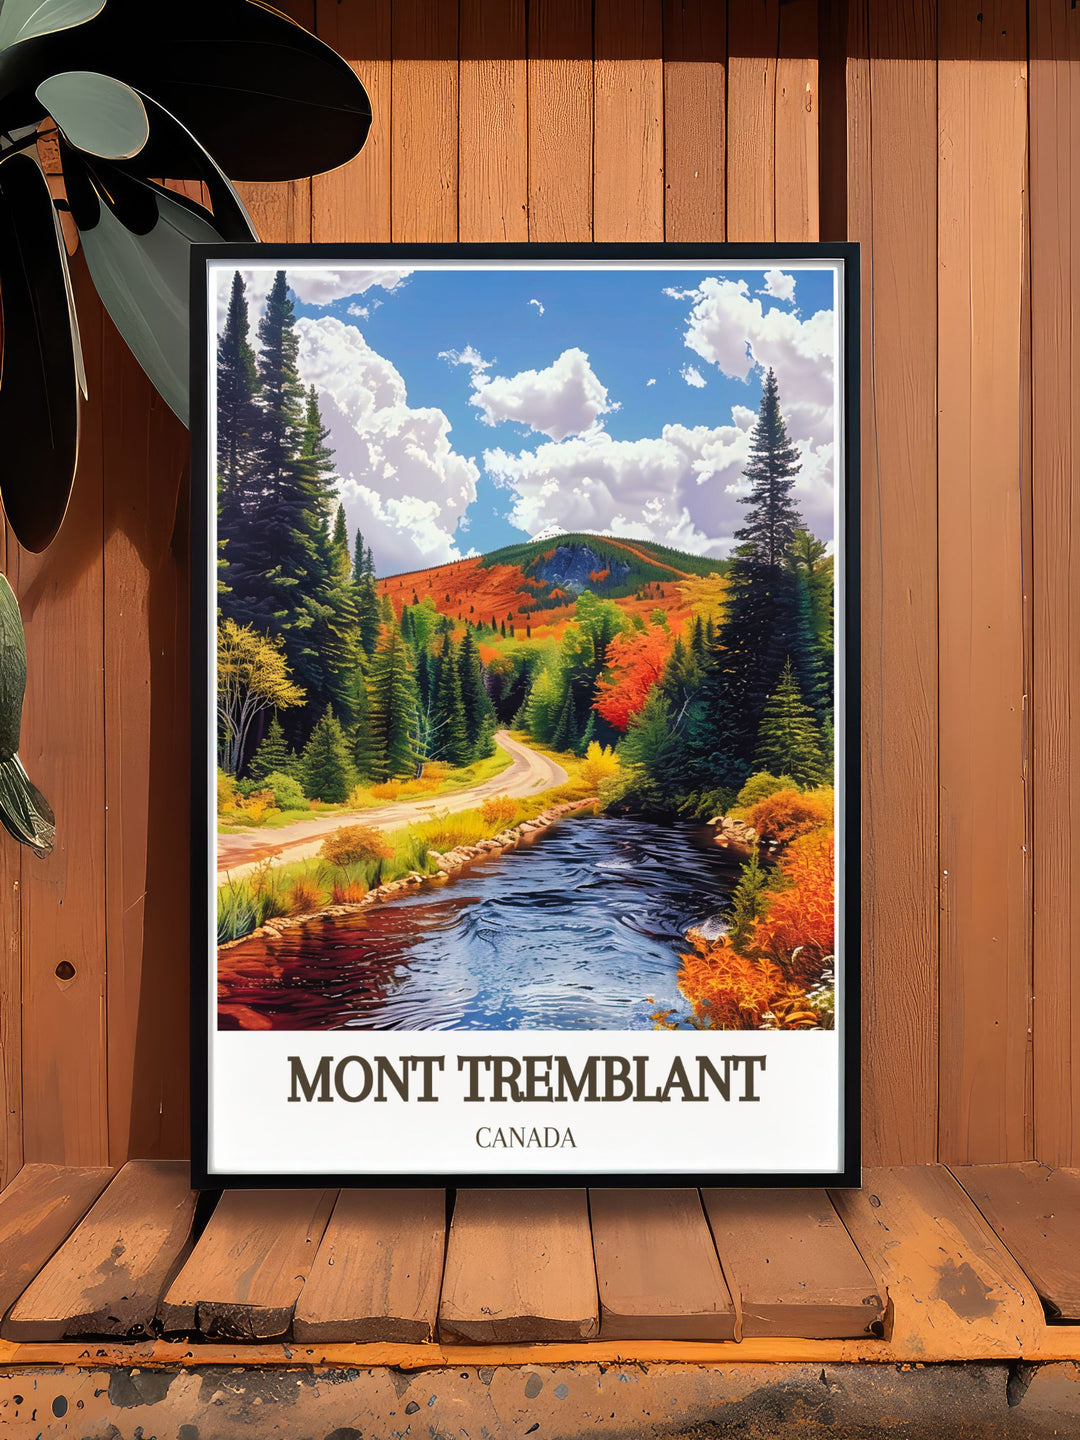 Framed print of Mont Tremblant National Park showcasing the stunning landscapes of Mont Tremblant Ski Resort and the Laurentian Mountains perfect for adding a touch of elegance and natural beauty to any room in your home or office.